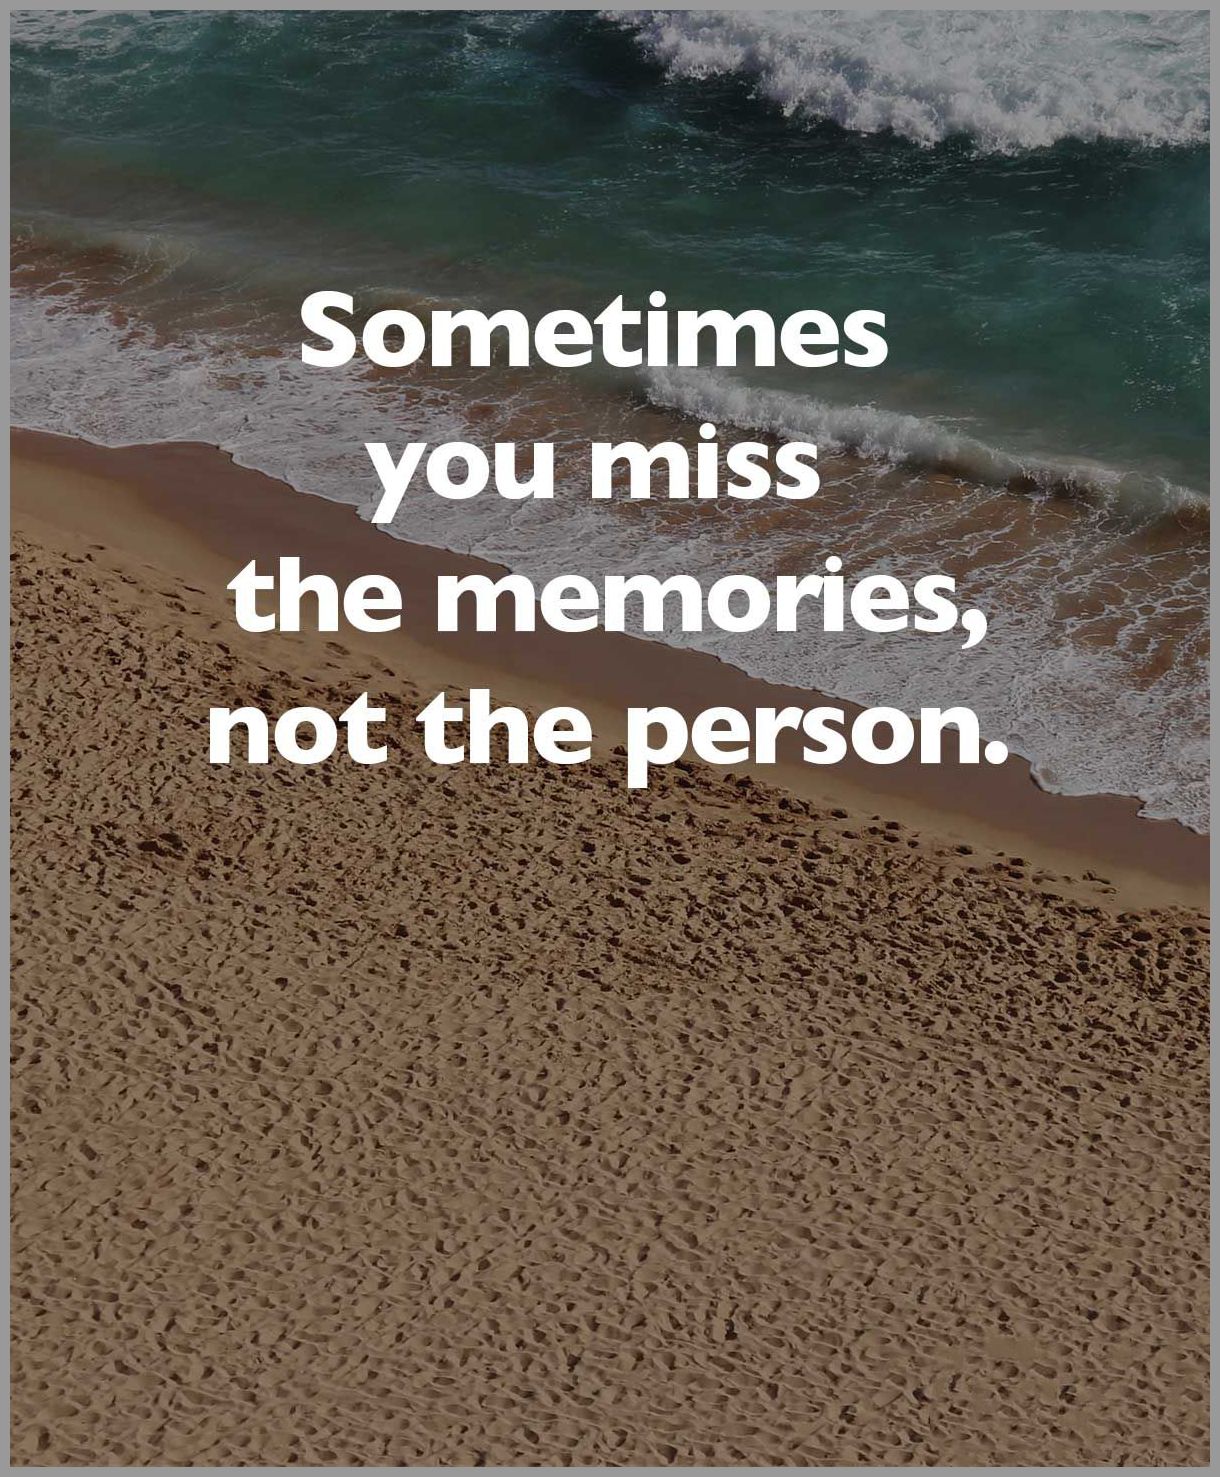 Sometimes you miss the memories not the person